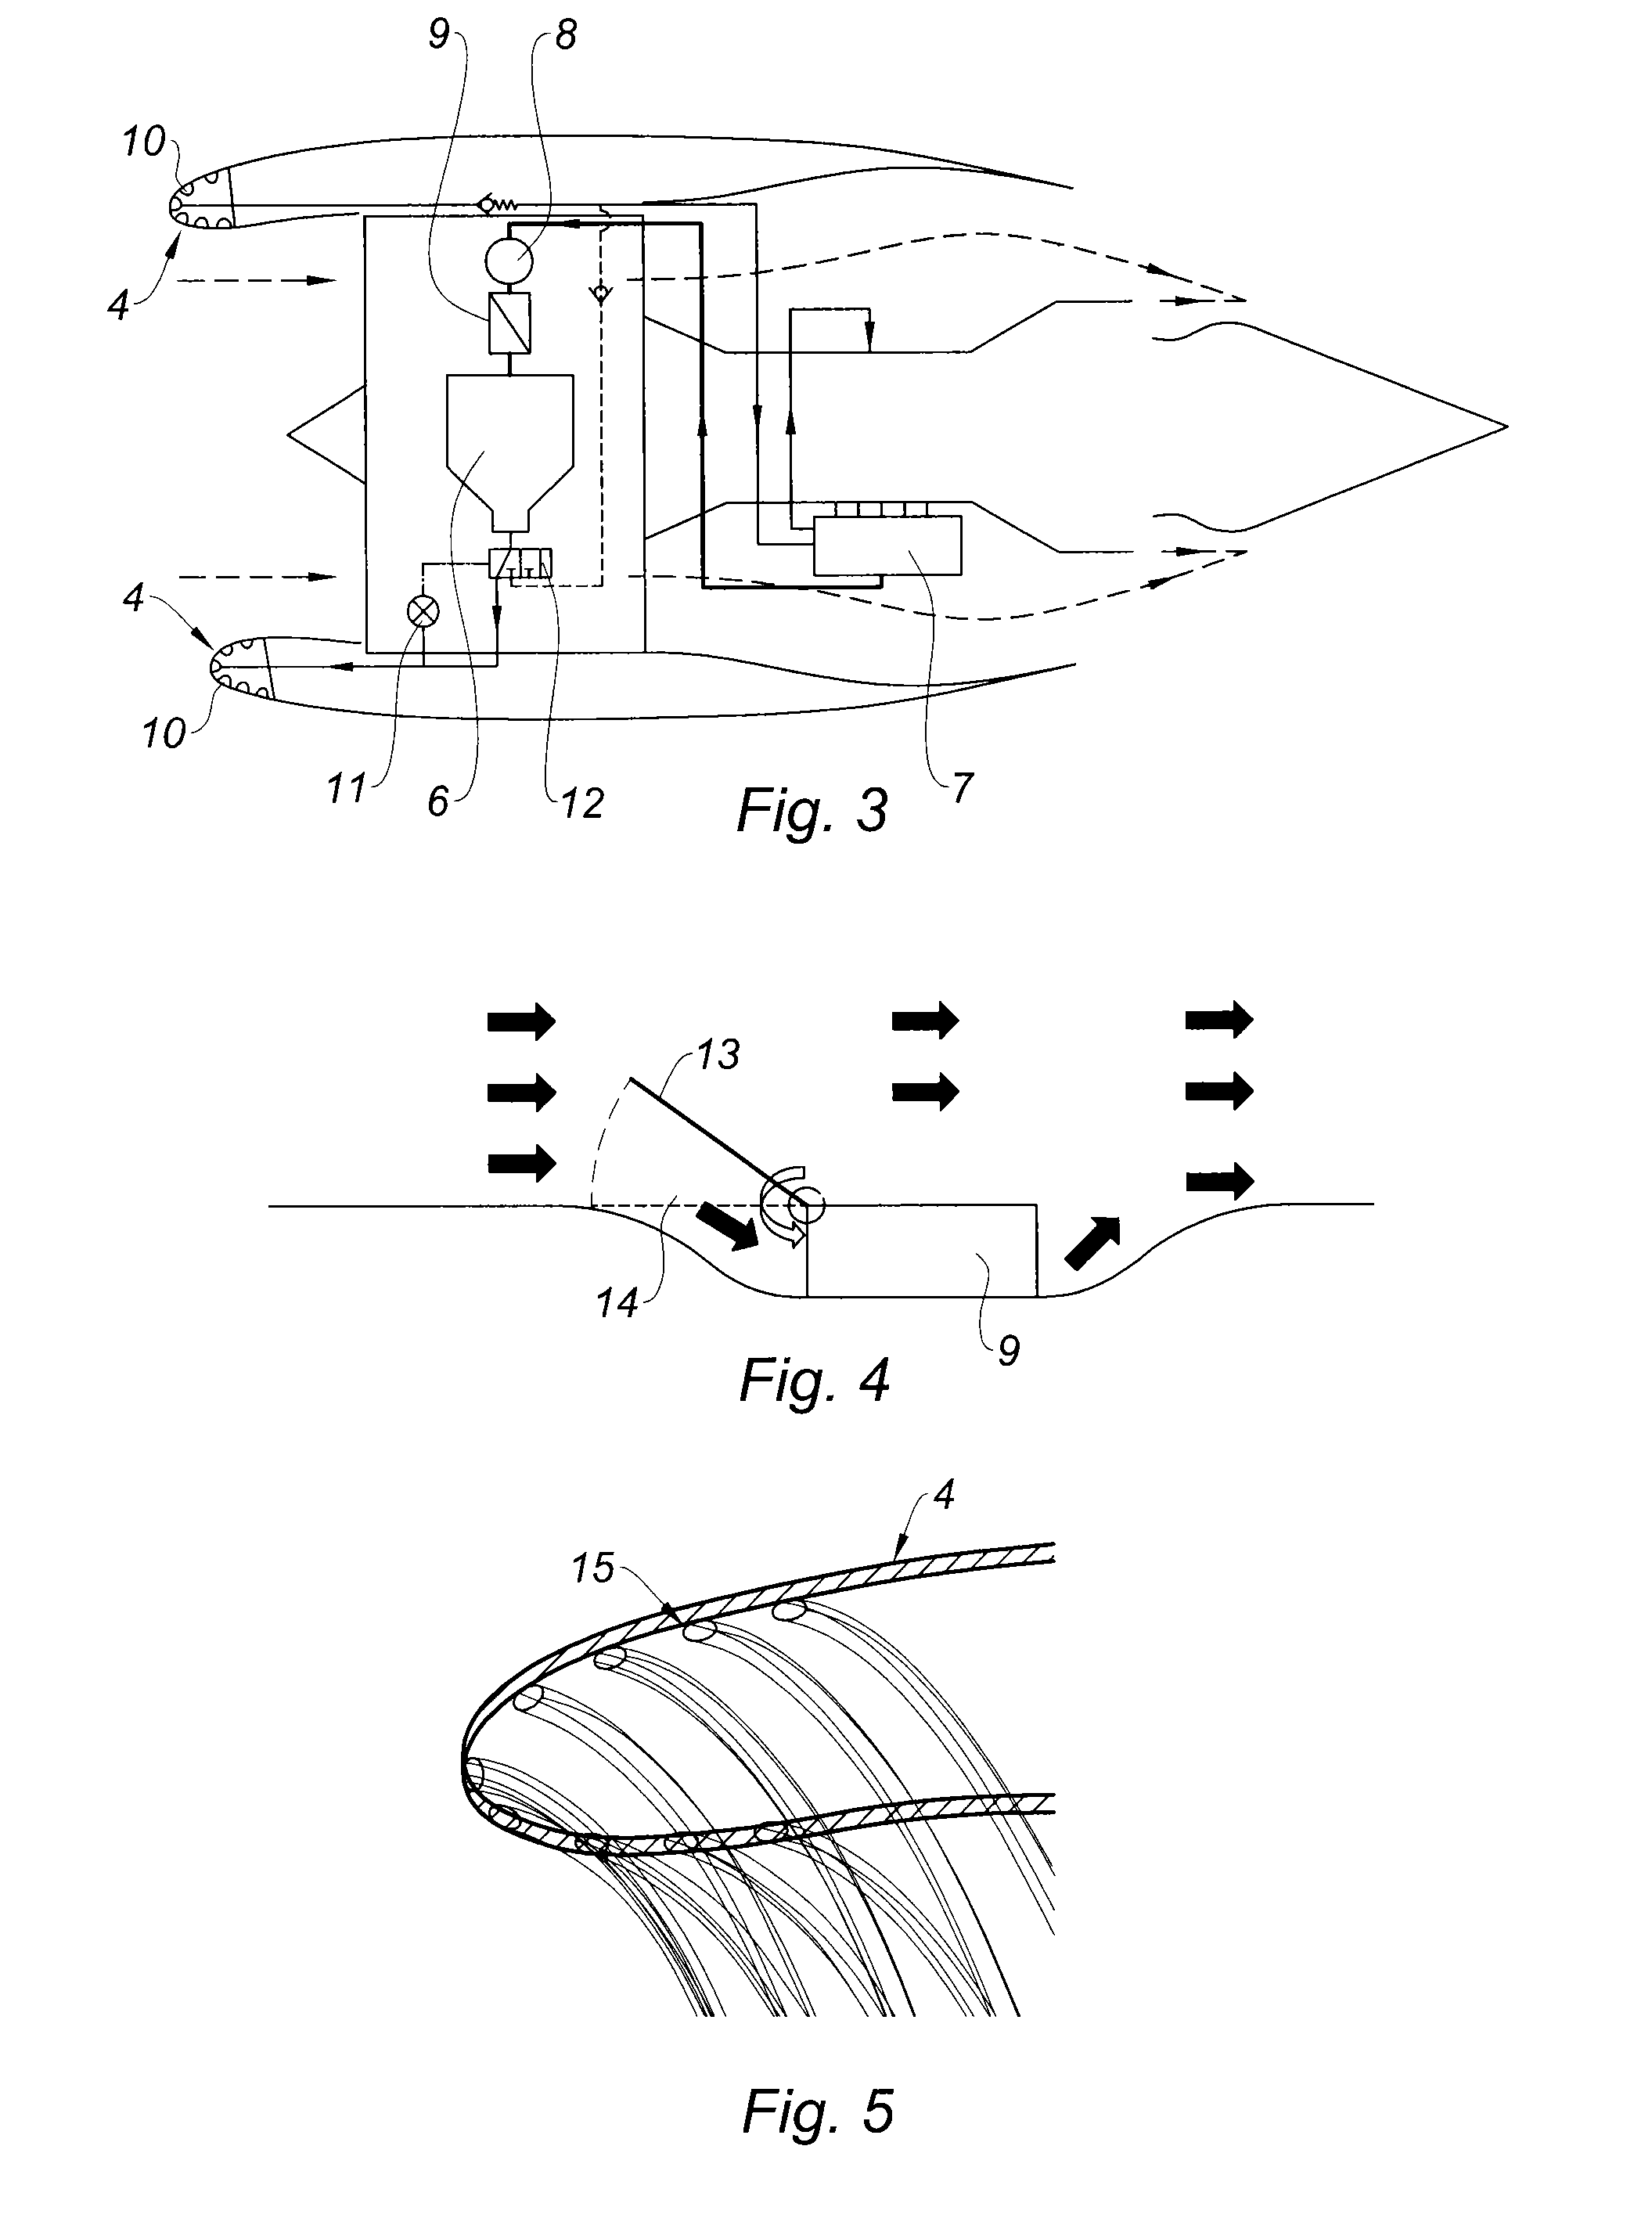 Regulated oil cooling system for a turbine engine with deicing of the nacelle